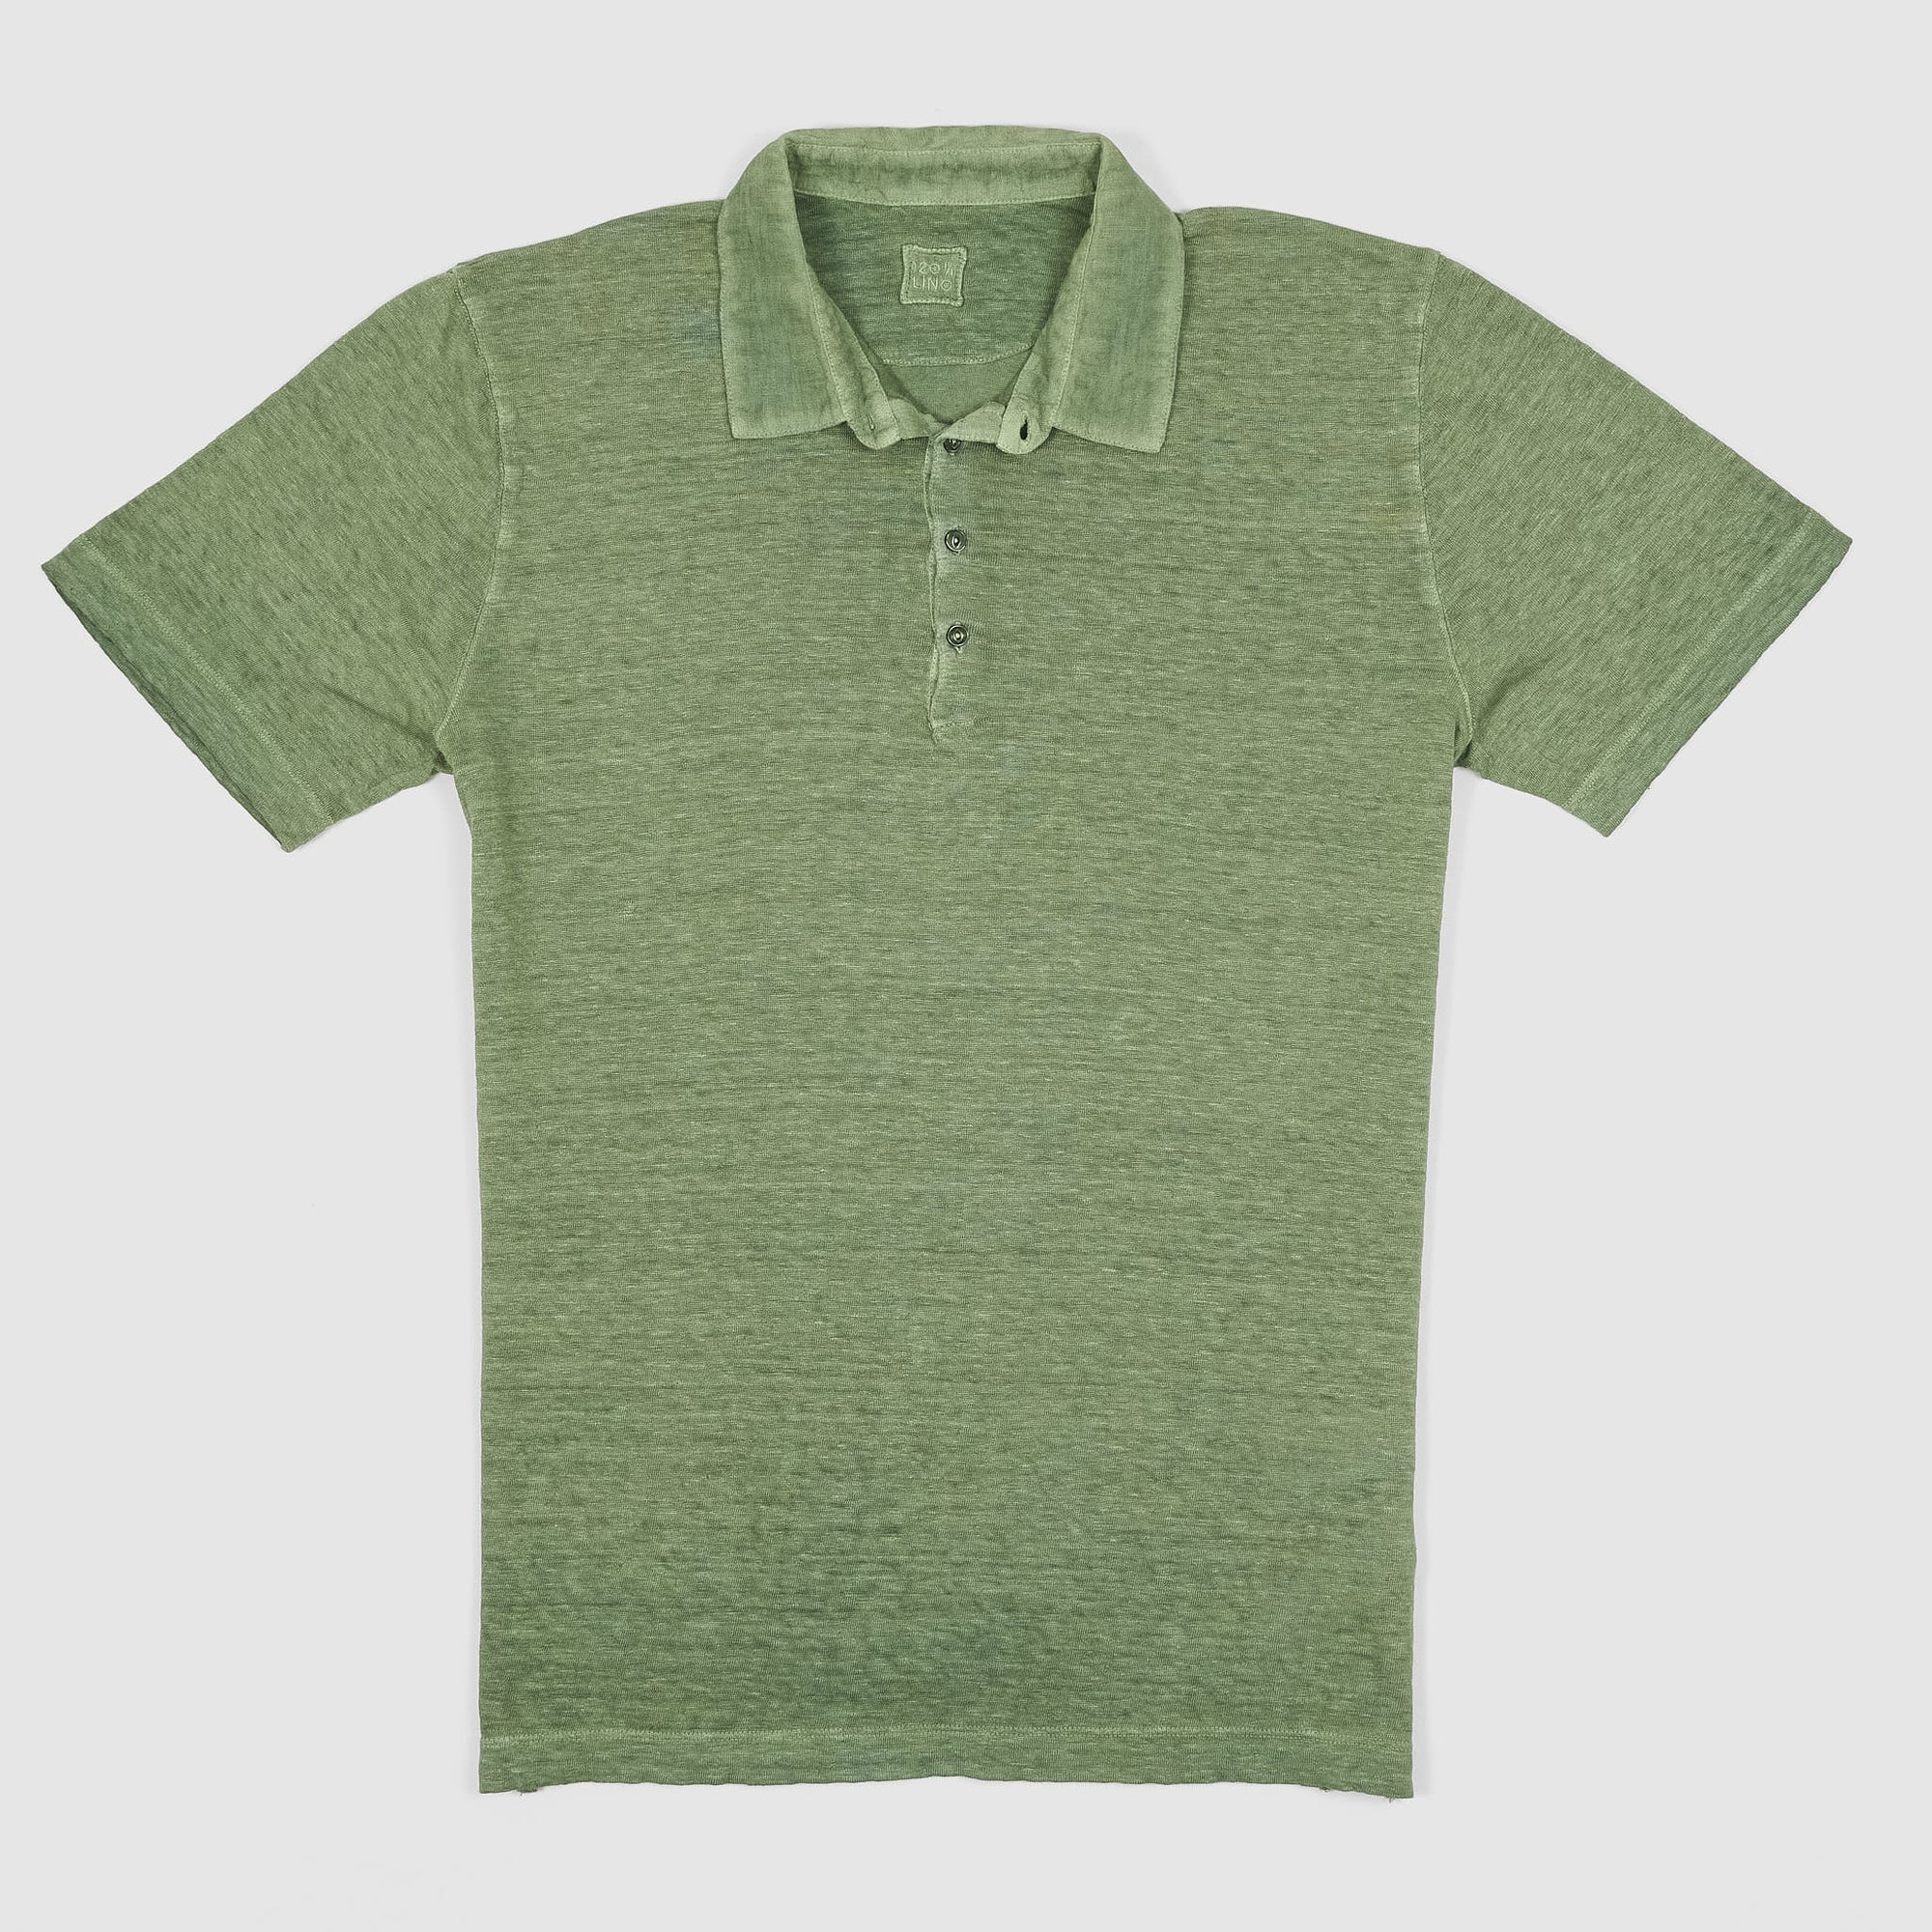 Gran Sasso Knitted Short Sleeve Polo Shirt - DeeCee style